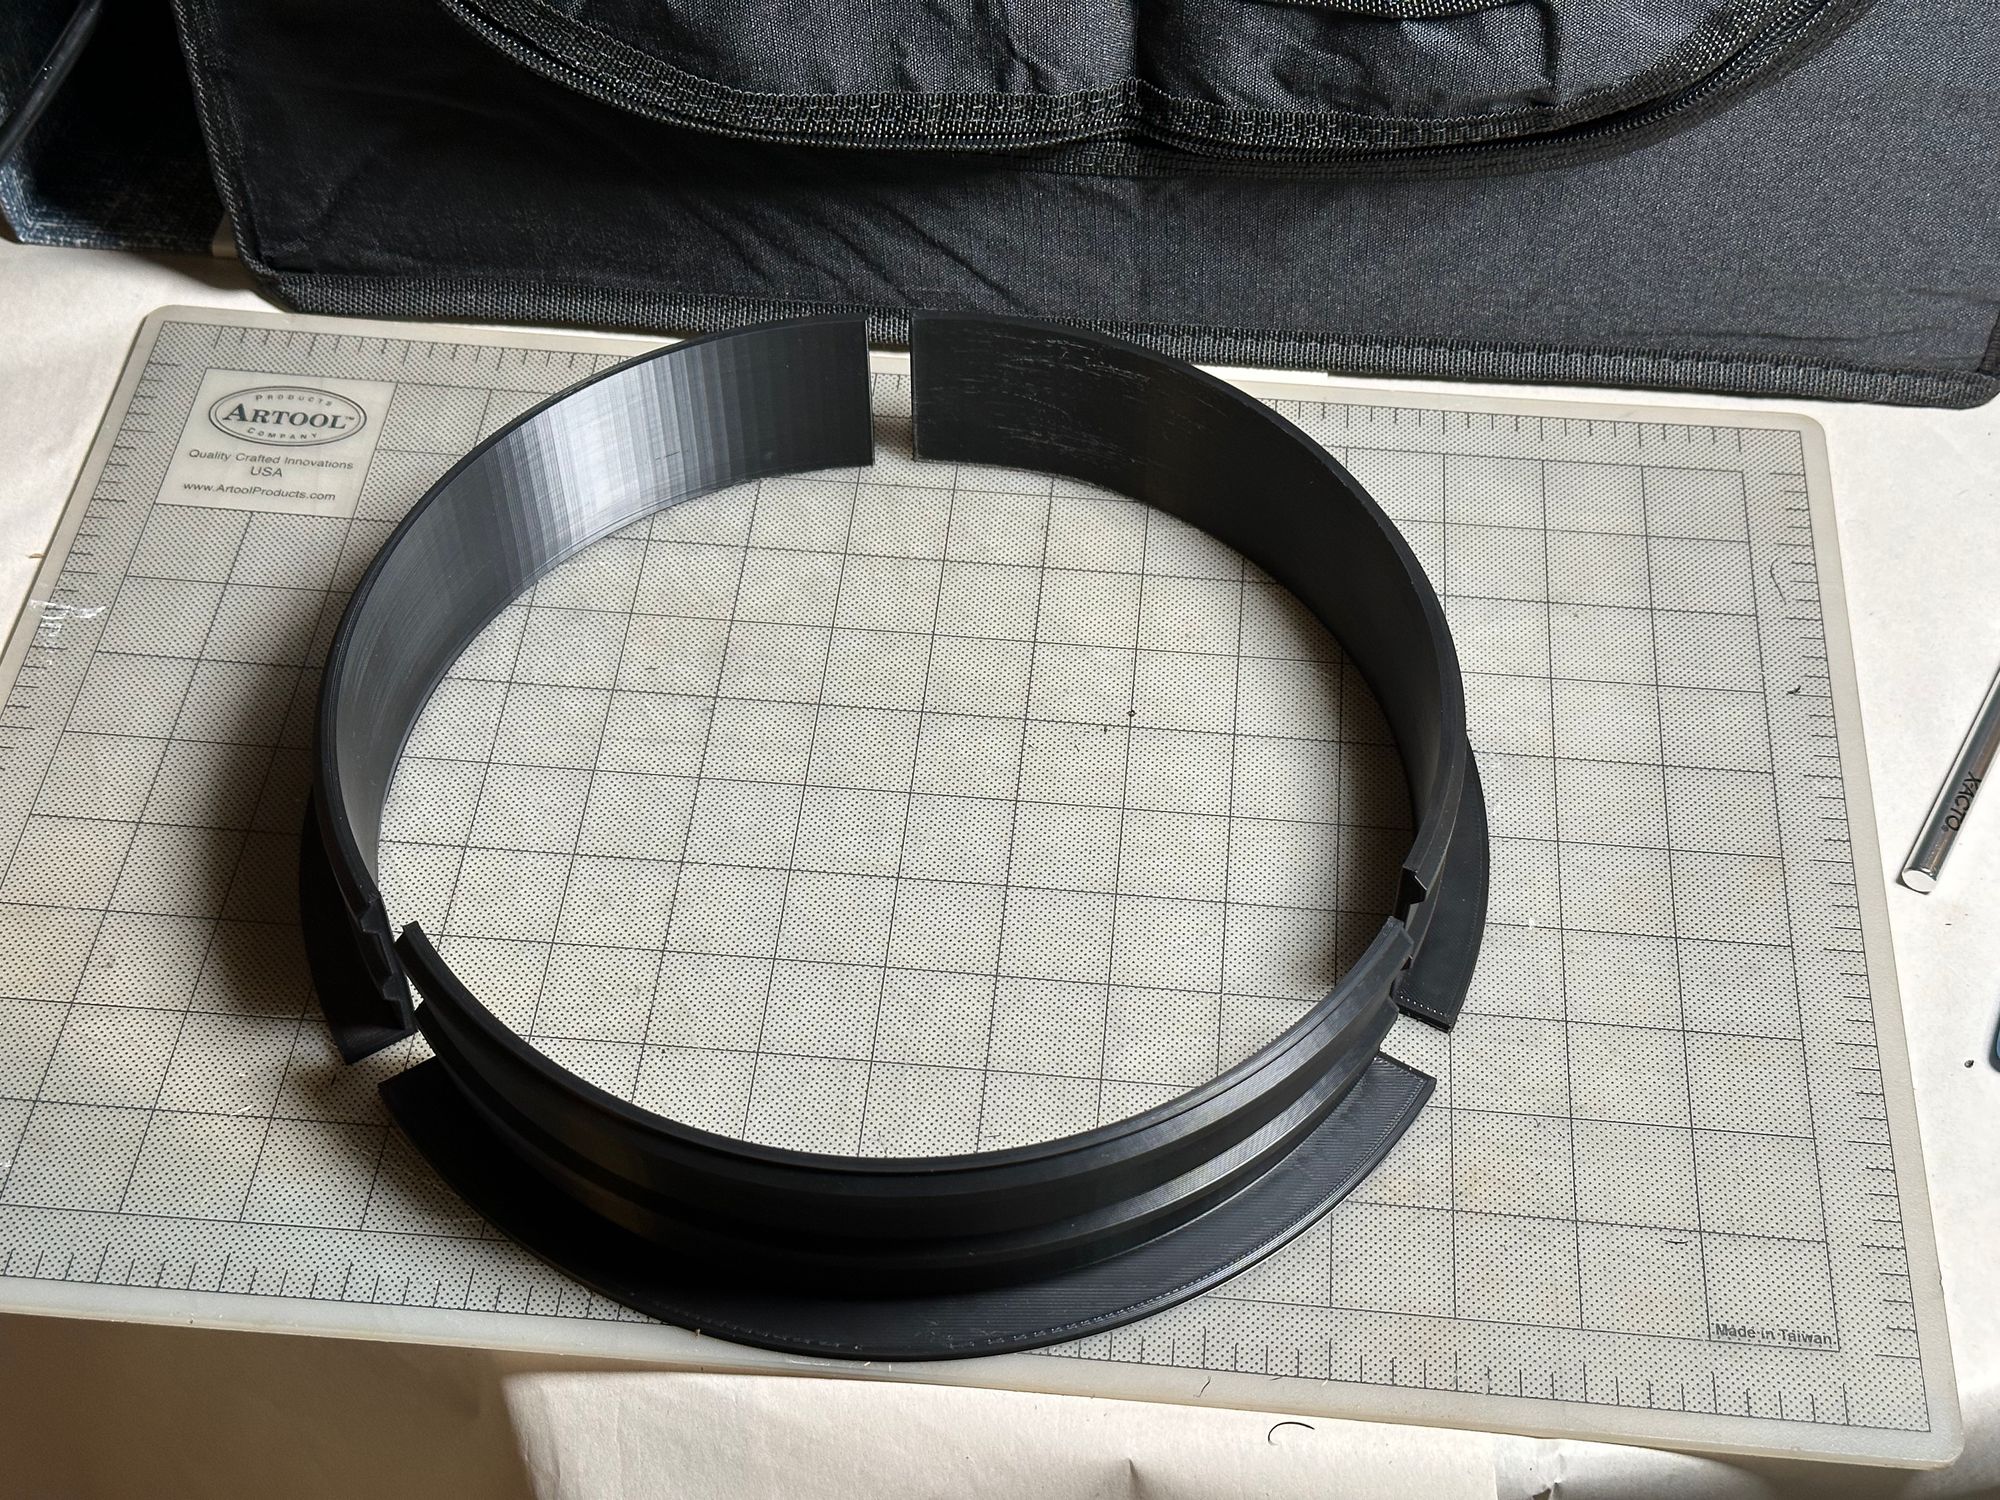 All three pieces of the duct ring, printed, trimmed, and arranged on a cutting surface.